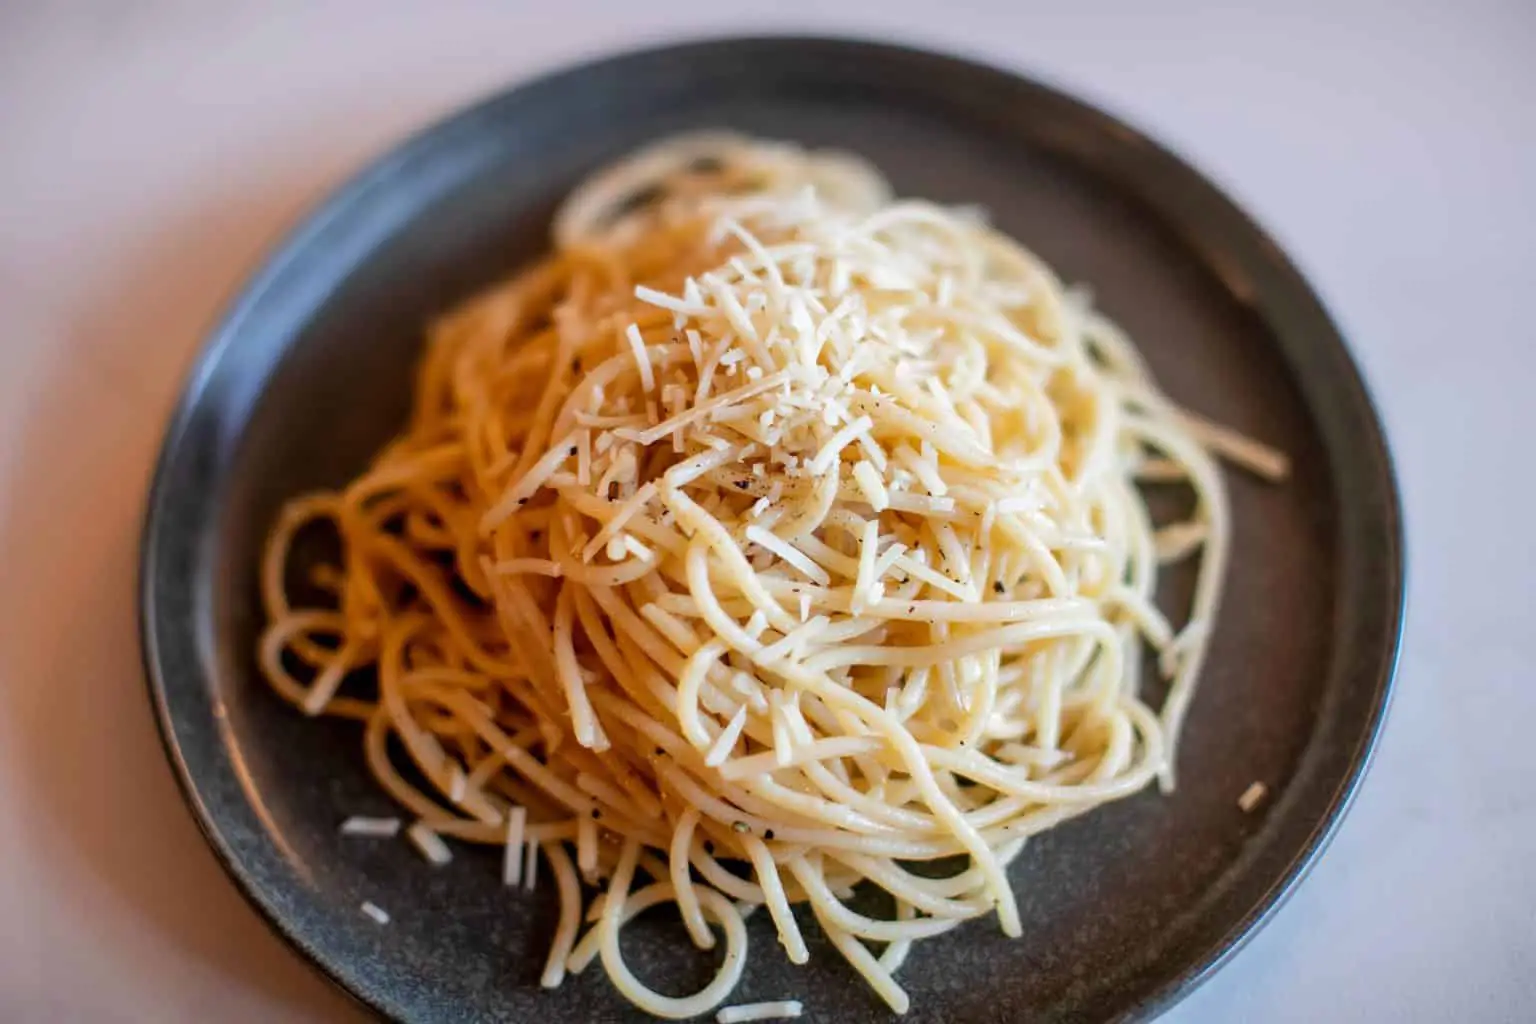 Parmesan buttered noodles with cheese served on a black plate placed on a white surface